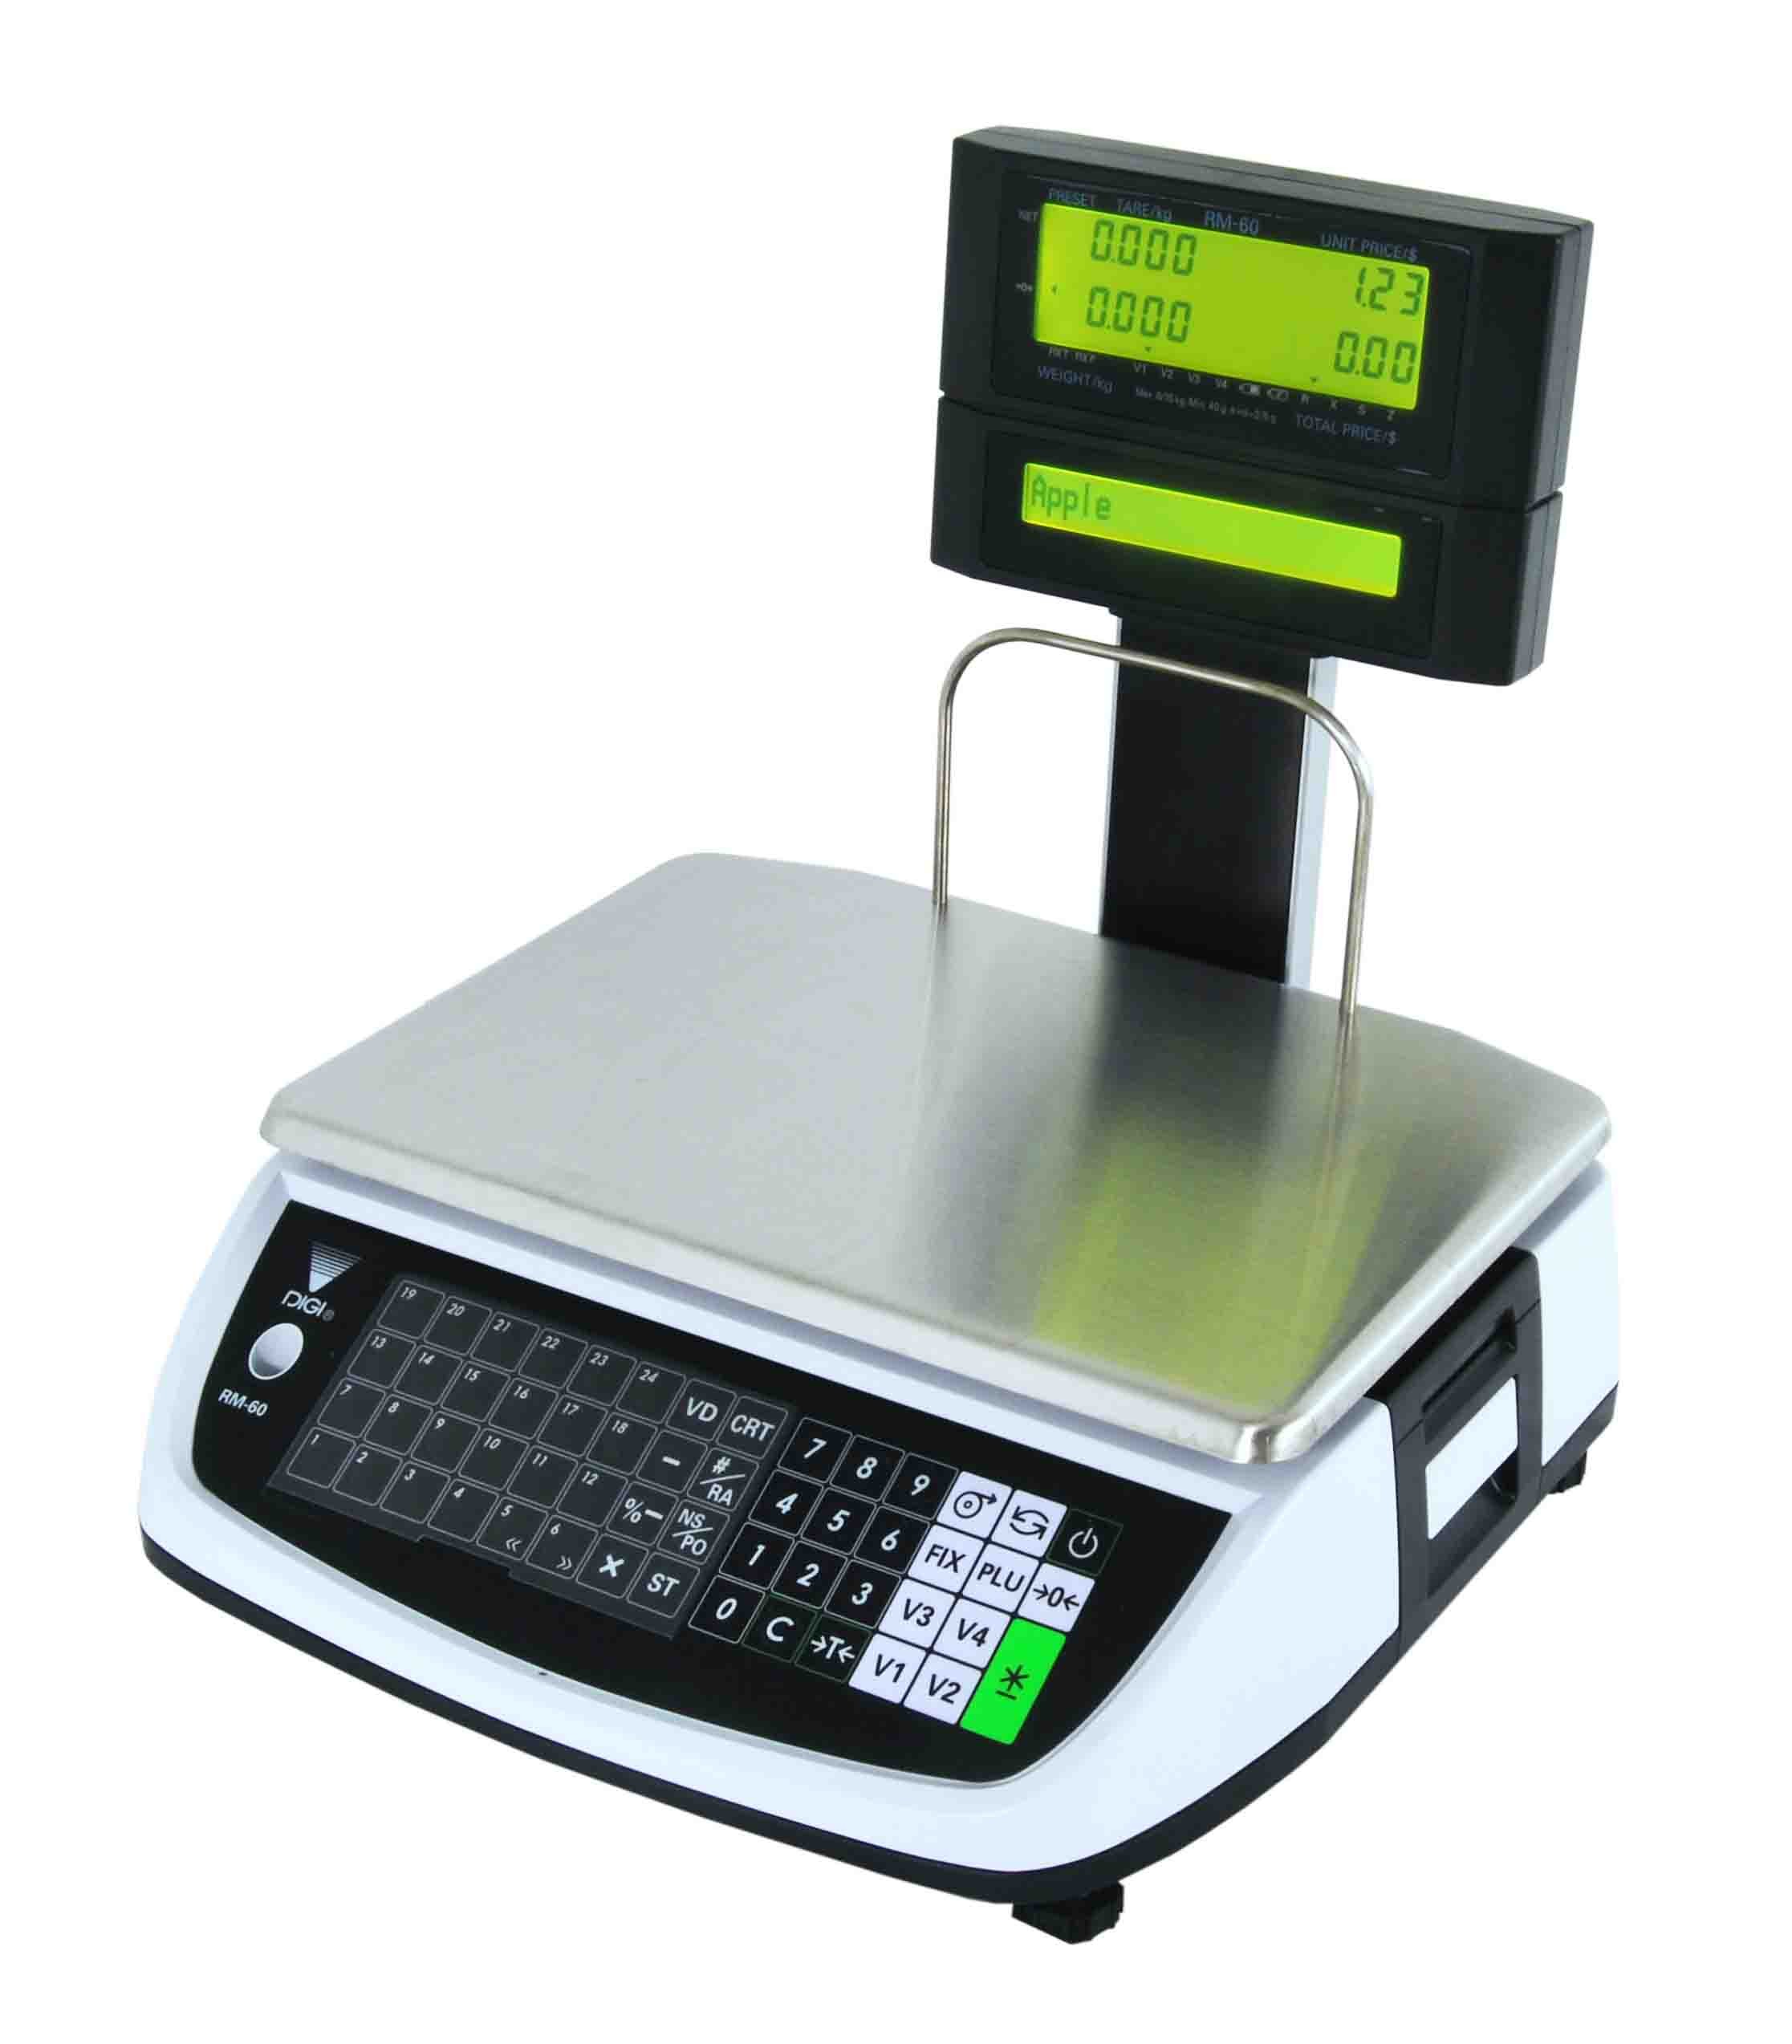 IPOS Ltd - Digi RM 60 weighing scale and cash register